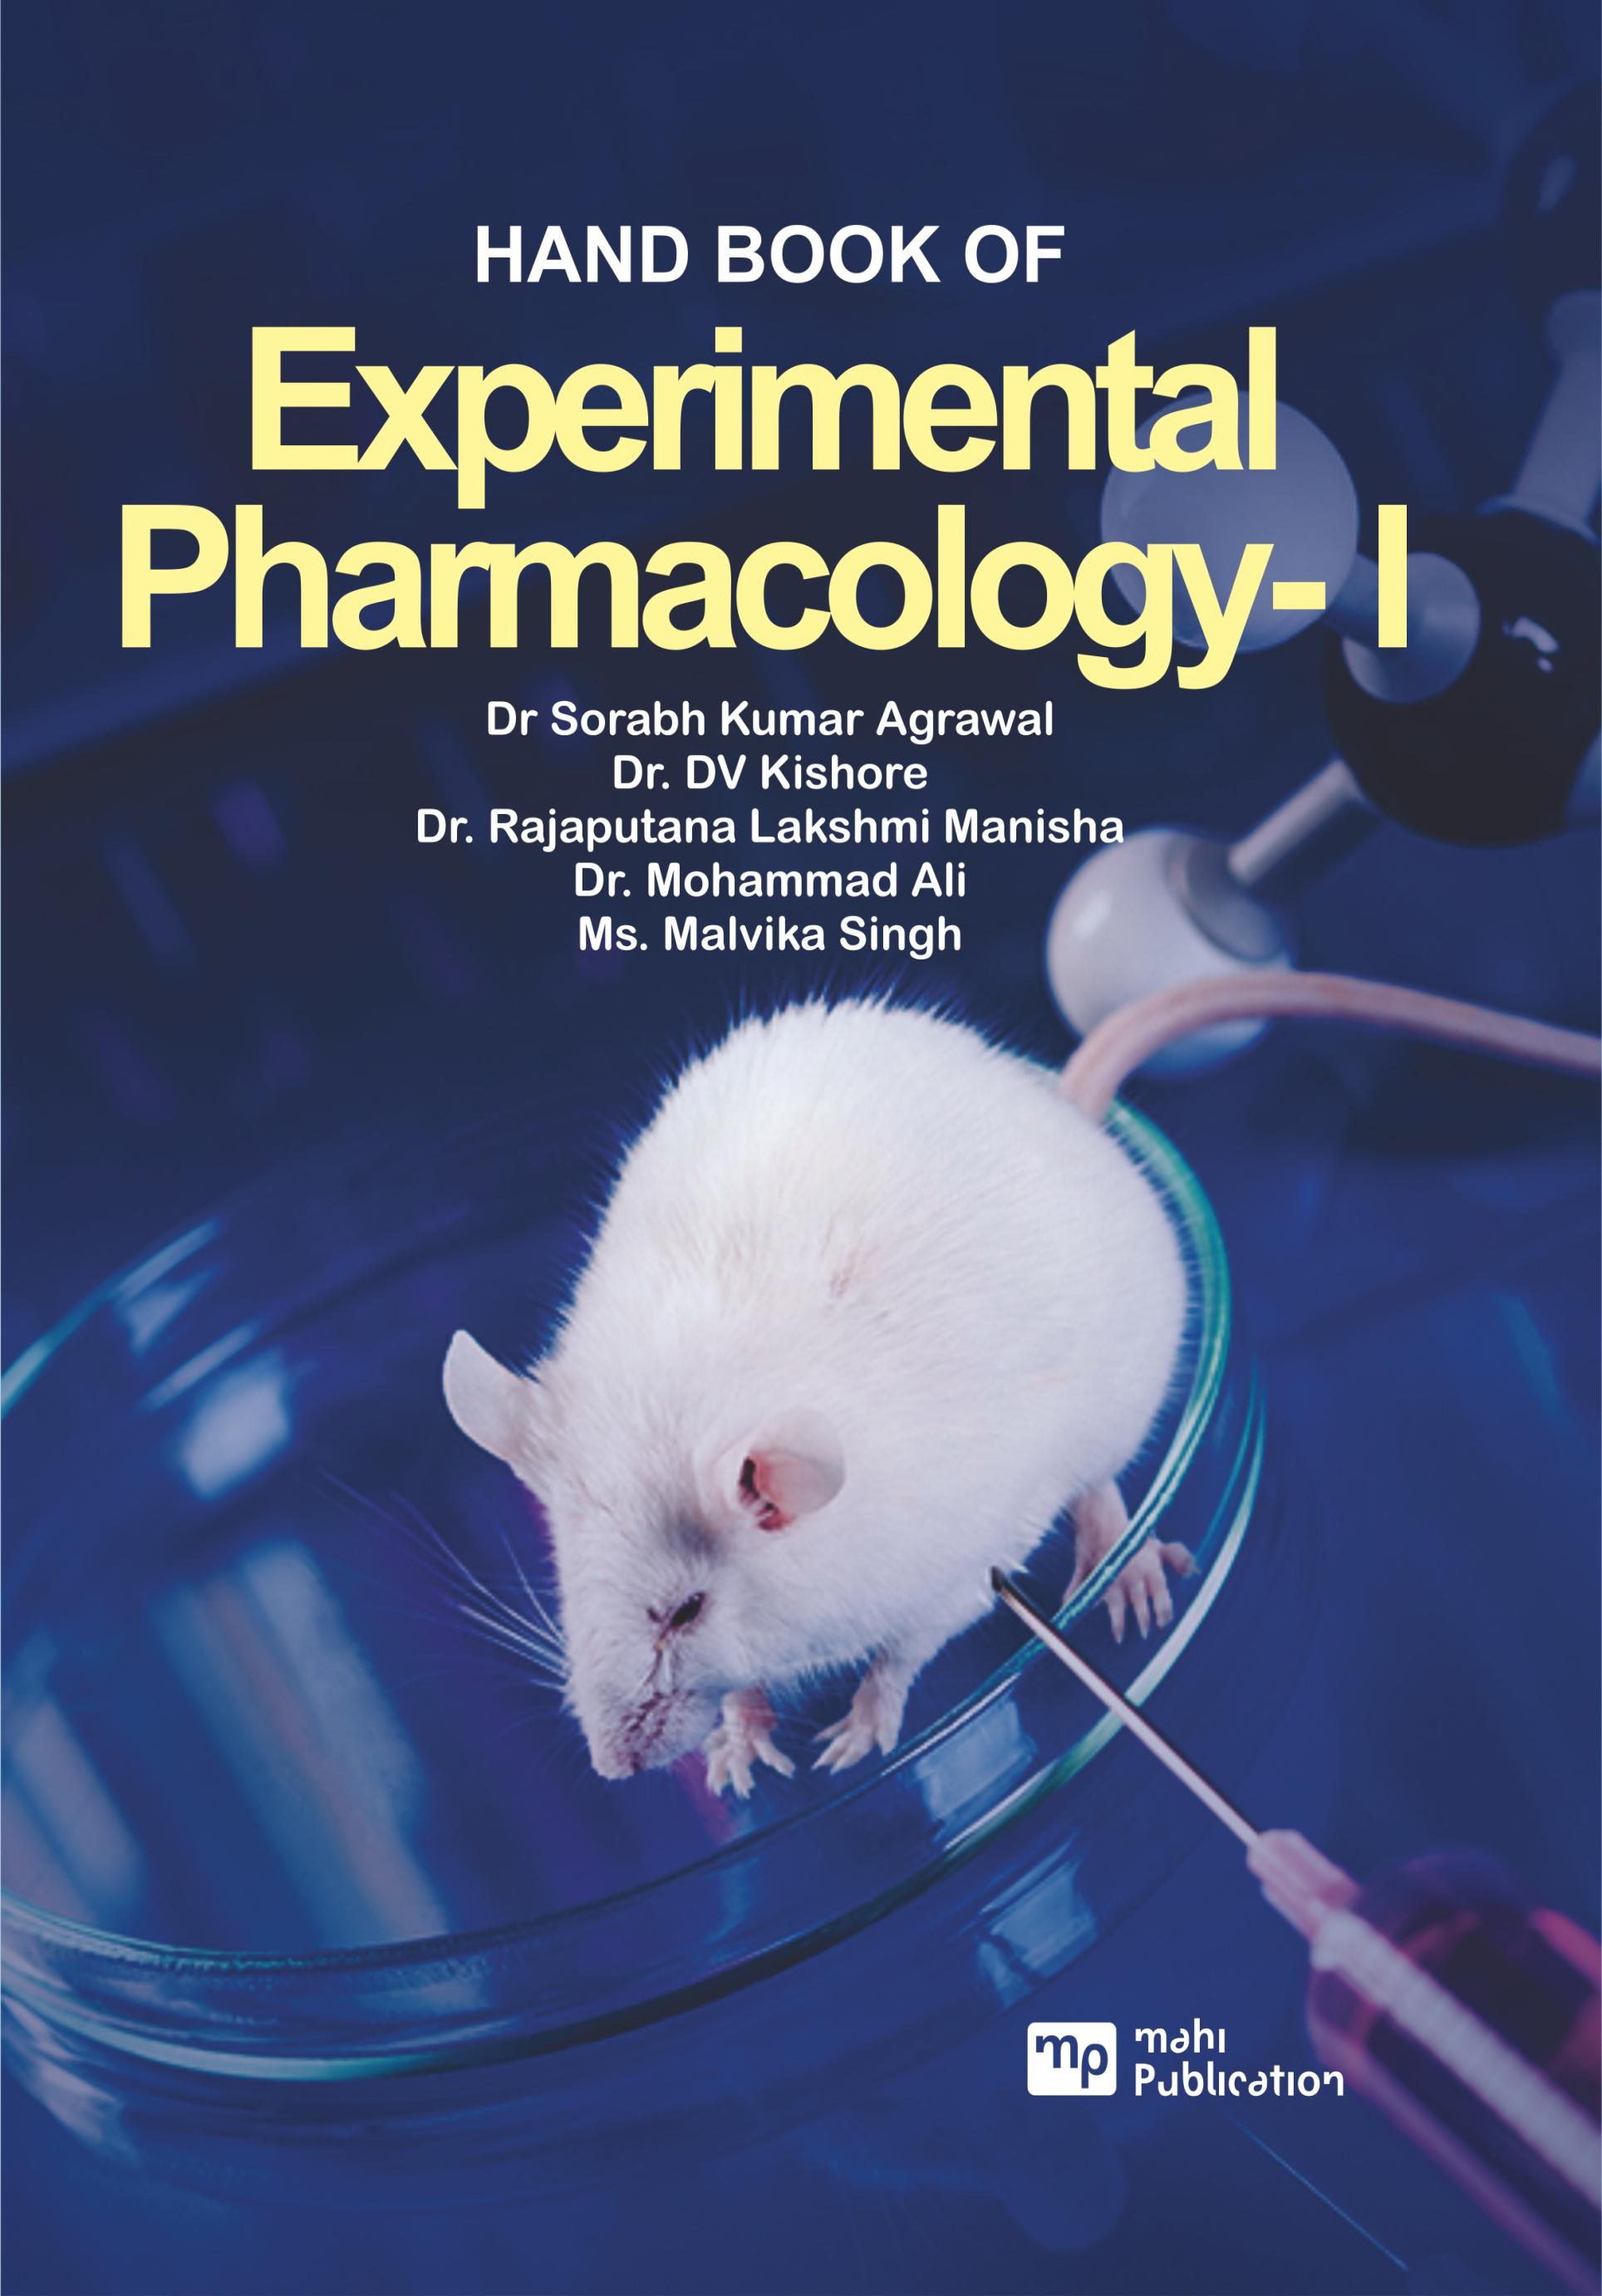 HAND BOOK OF Experimental Pharmacology- I